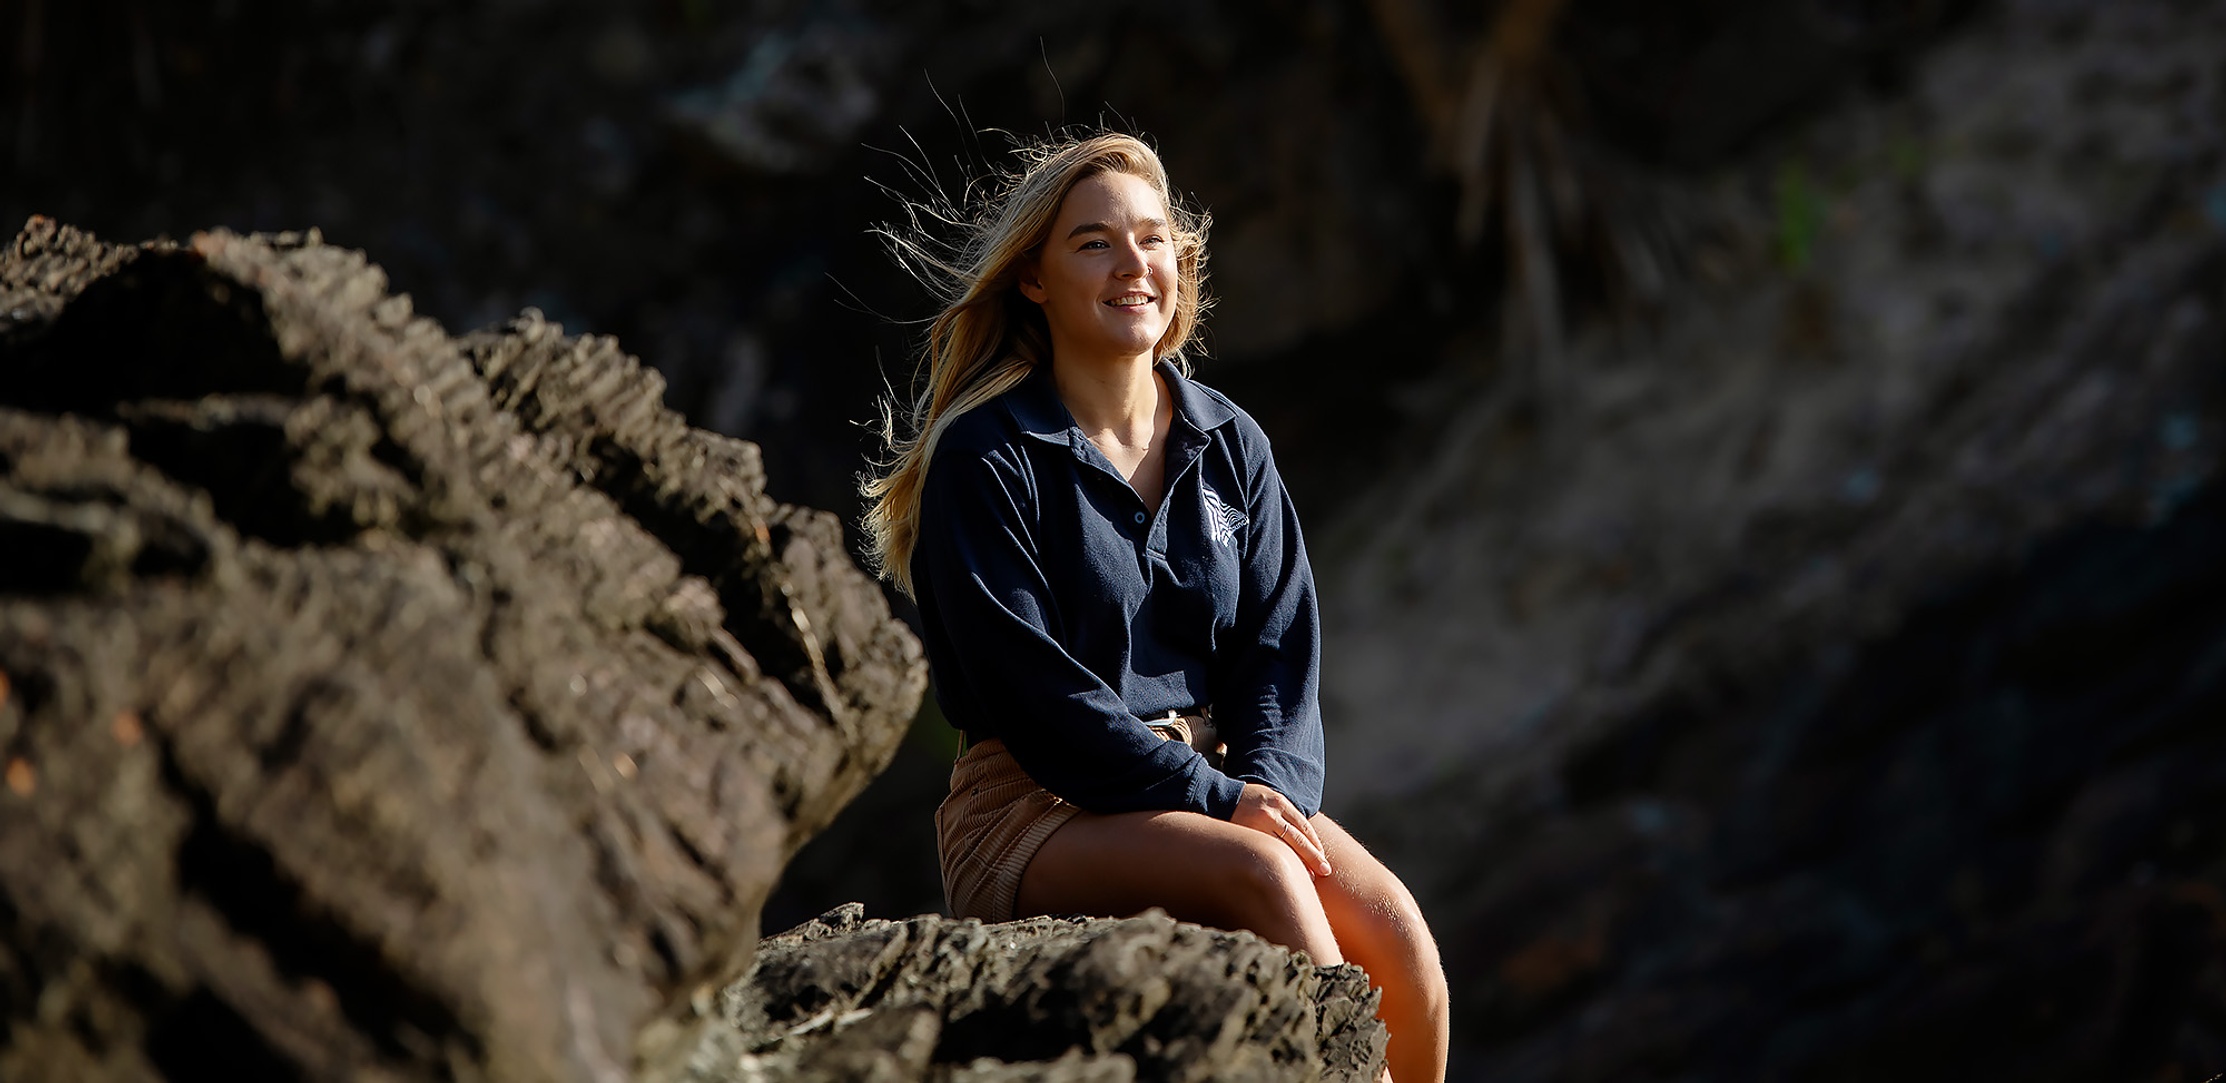 A marine science alumni sits in a rocky coastal landscape, she is wearing a blue long sleeved shirt and brown shorts and is smiling off to the side of the camera